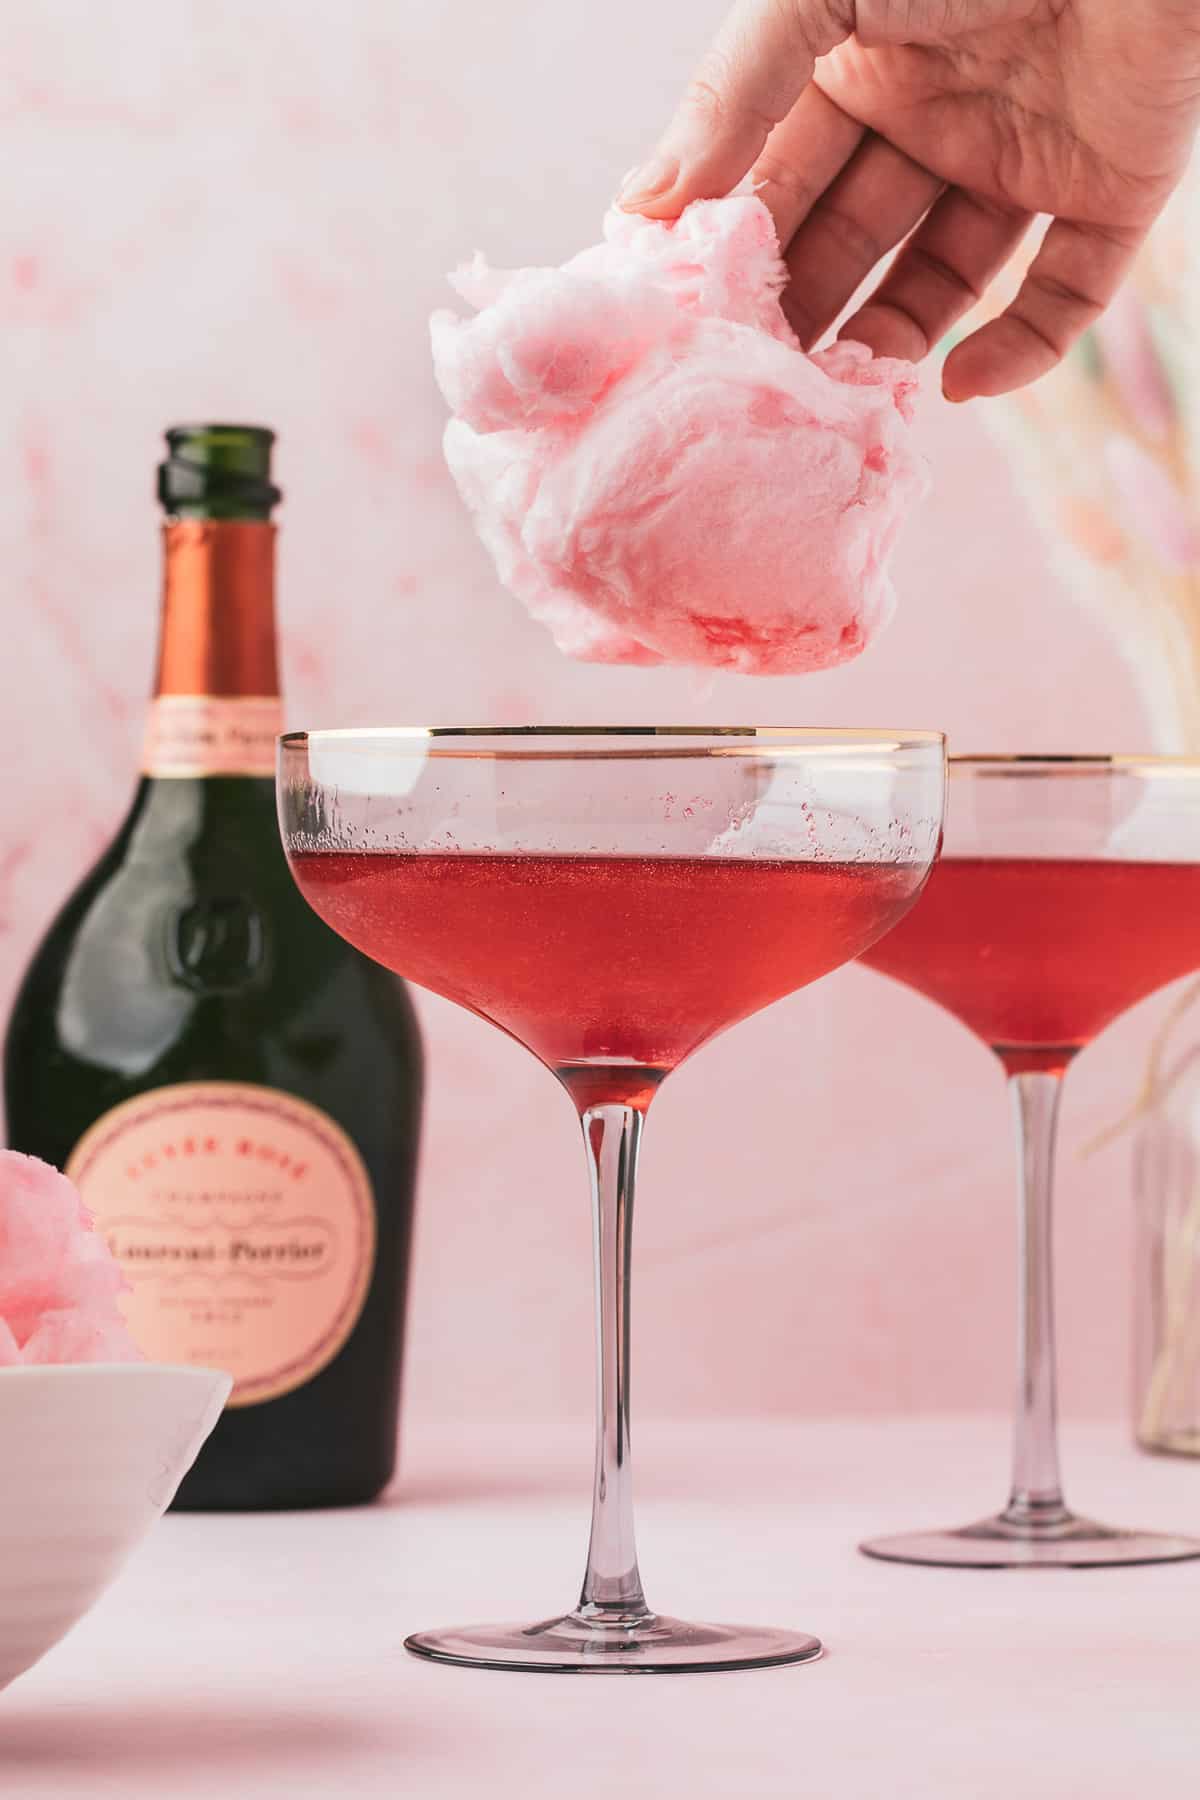 Cotton candy added to glass of champagne.